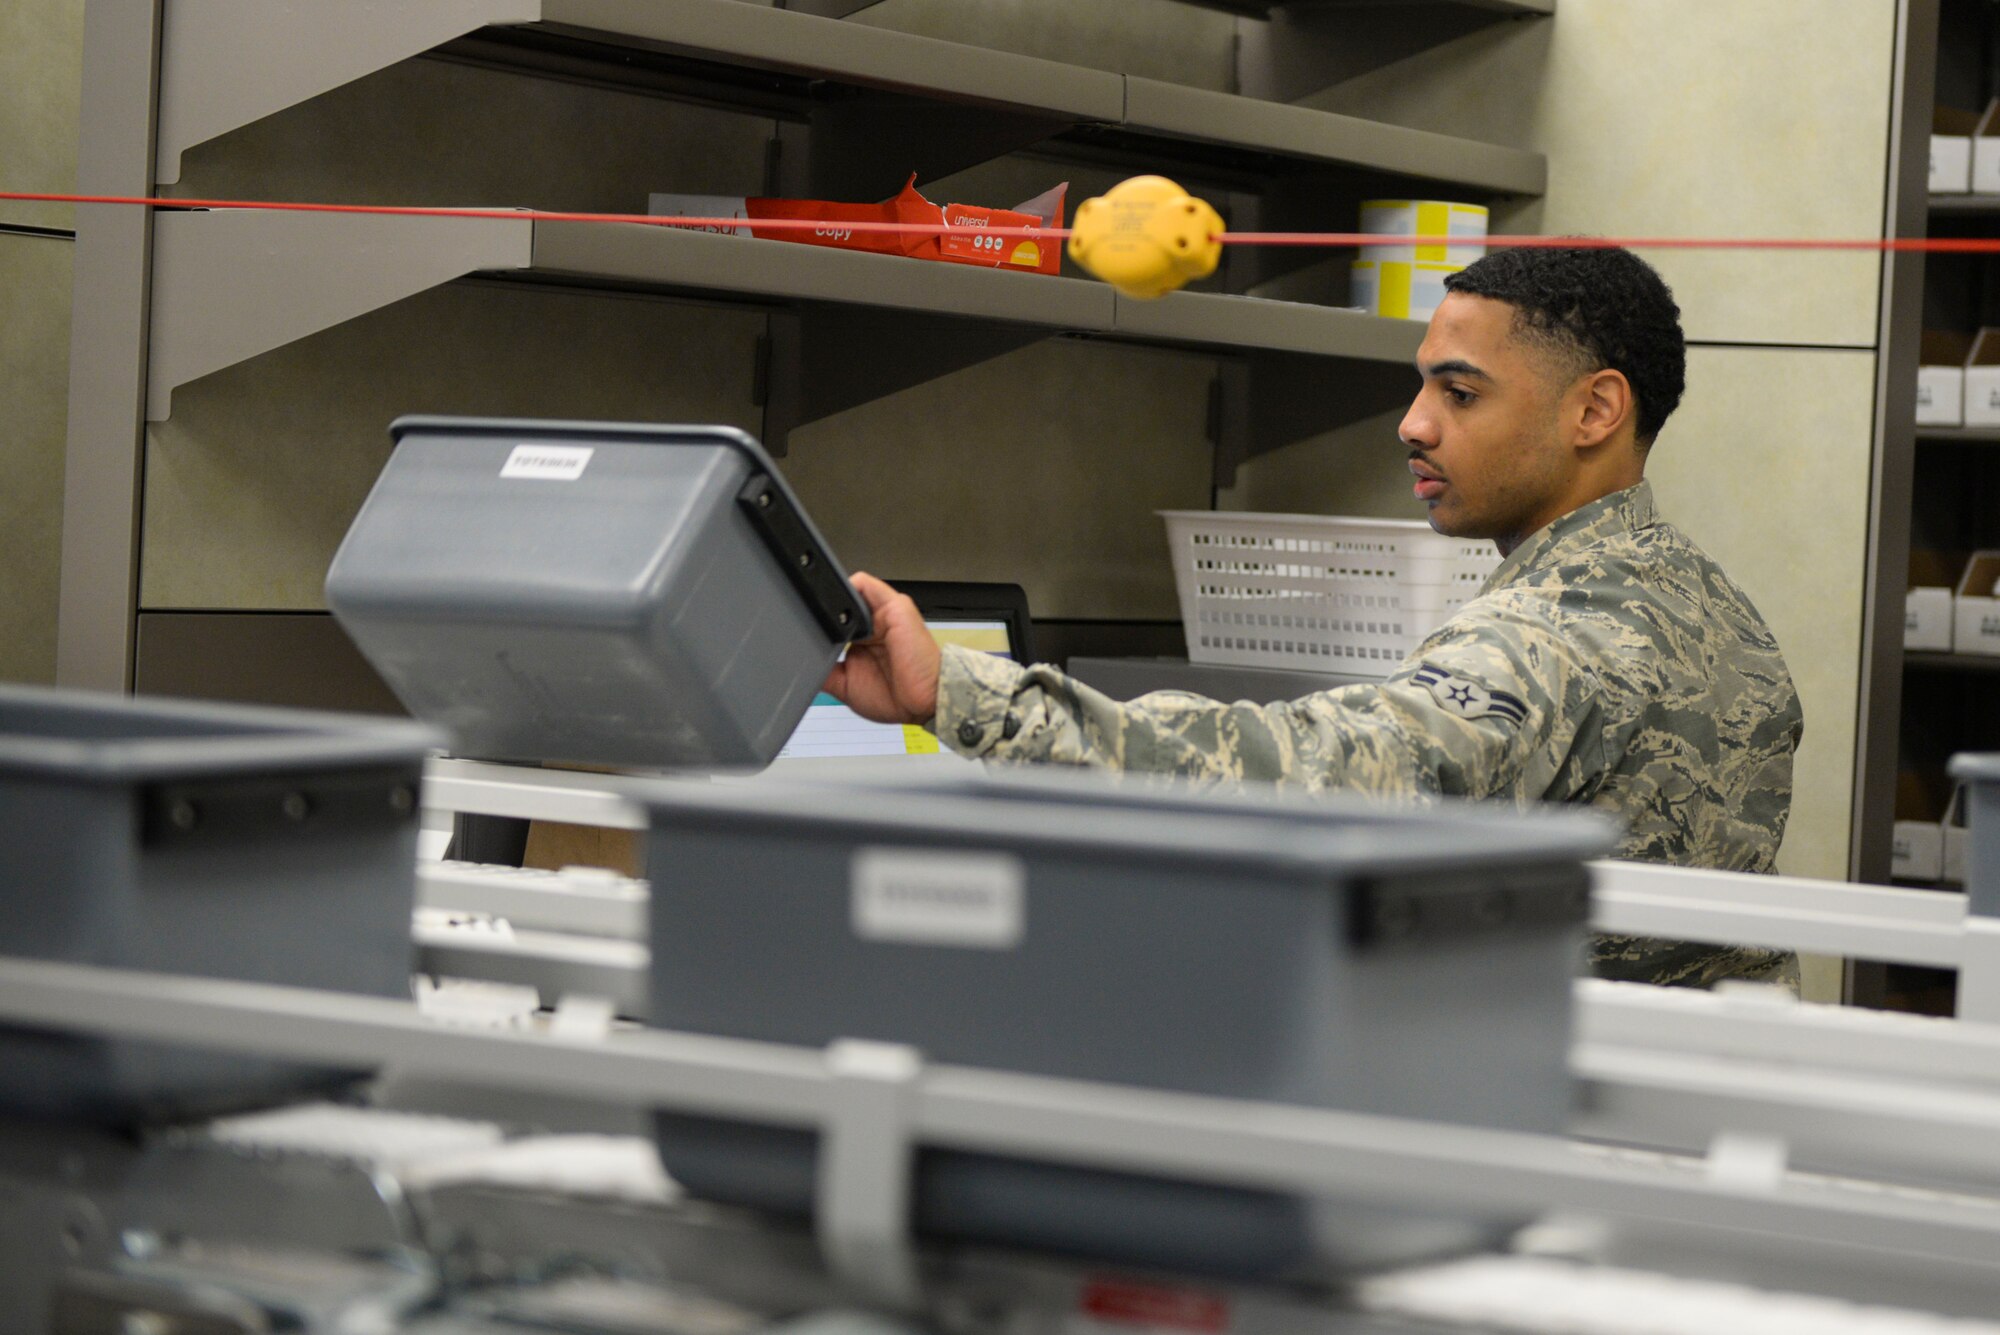 Airman 1st Class John Richardson, 88th Medical Group pharmacy technician, grabs a transport bucket off the conveyor belt for packaging, inside the new Kittyhawk Satellite Pharmacy, Nov. 13, 2018, at Wright-Patterson Air Force Base, Ohio.